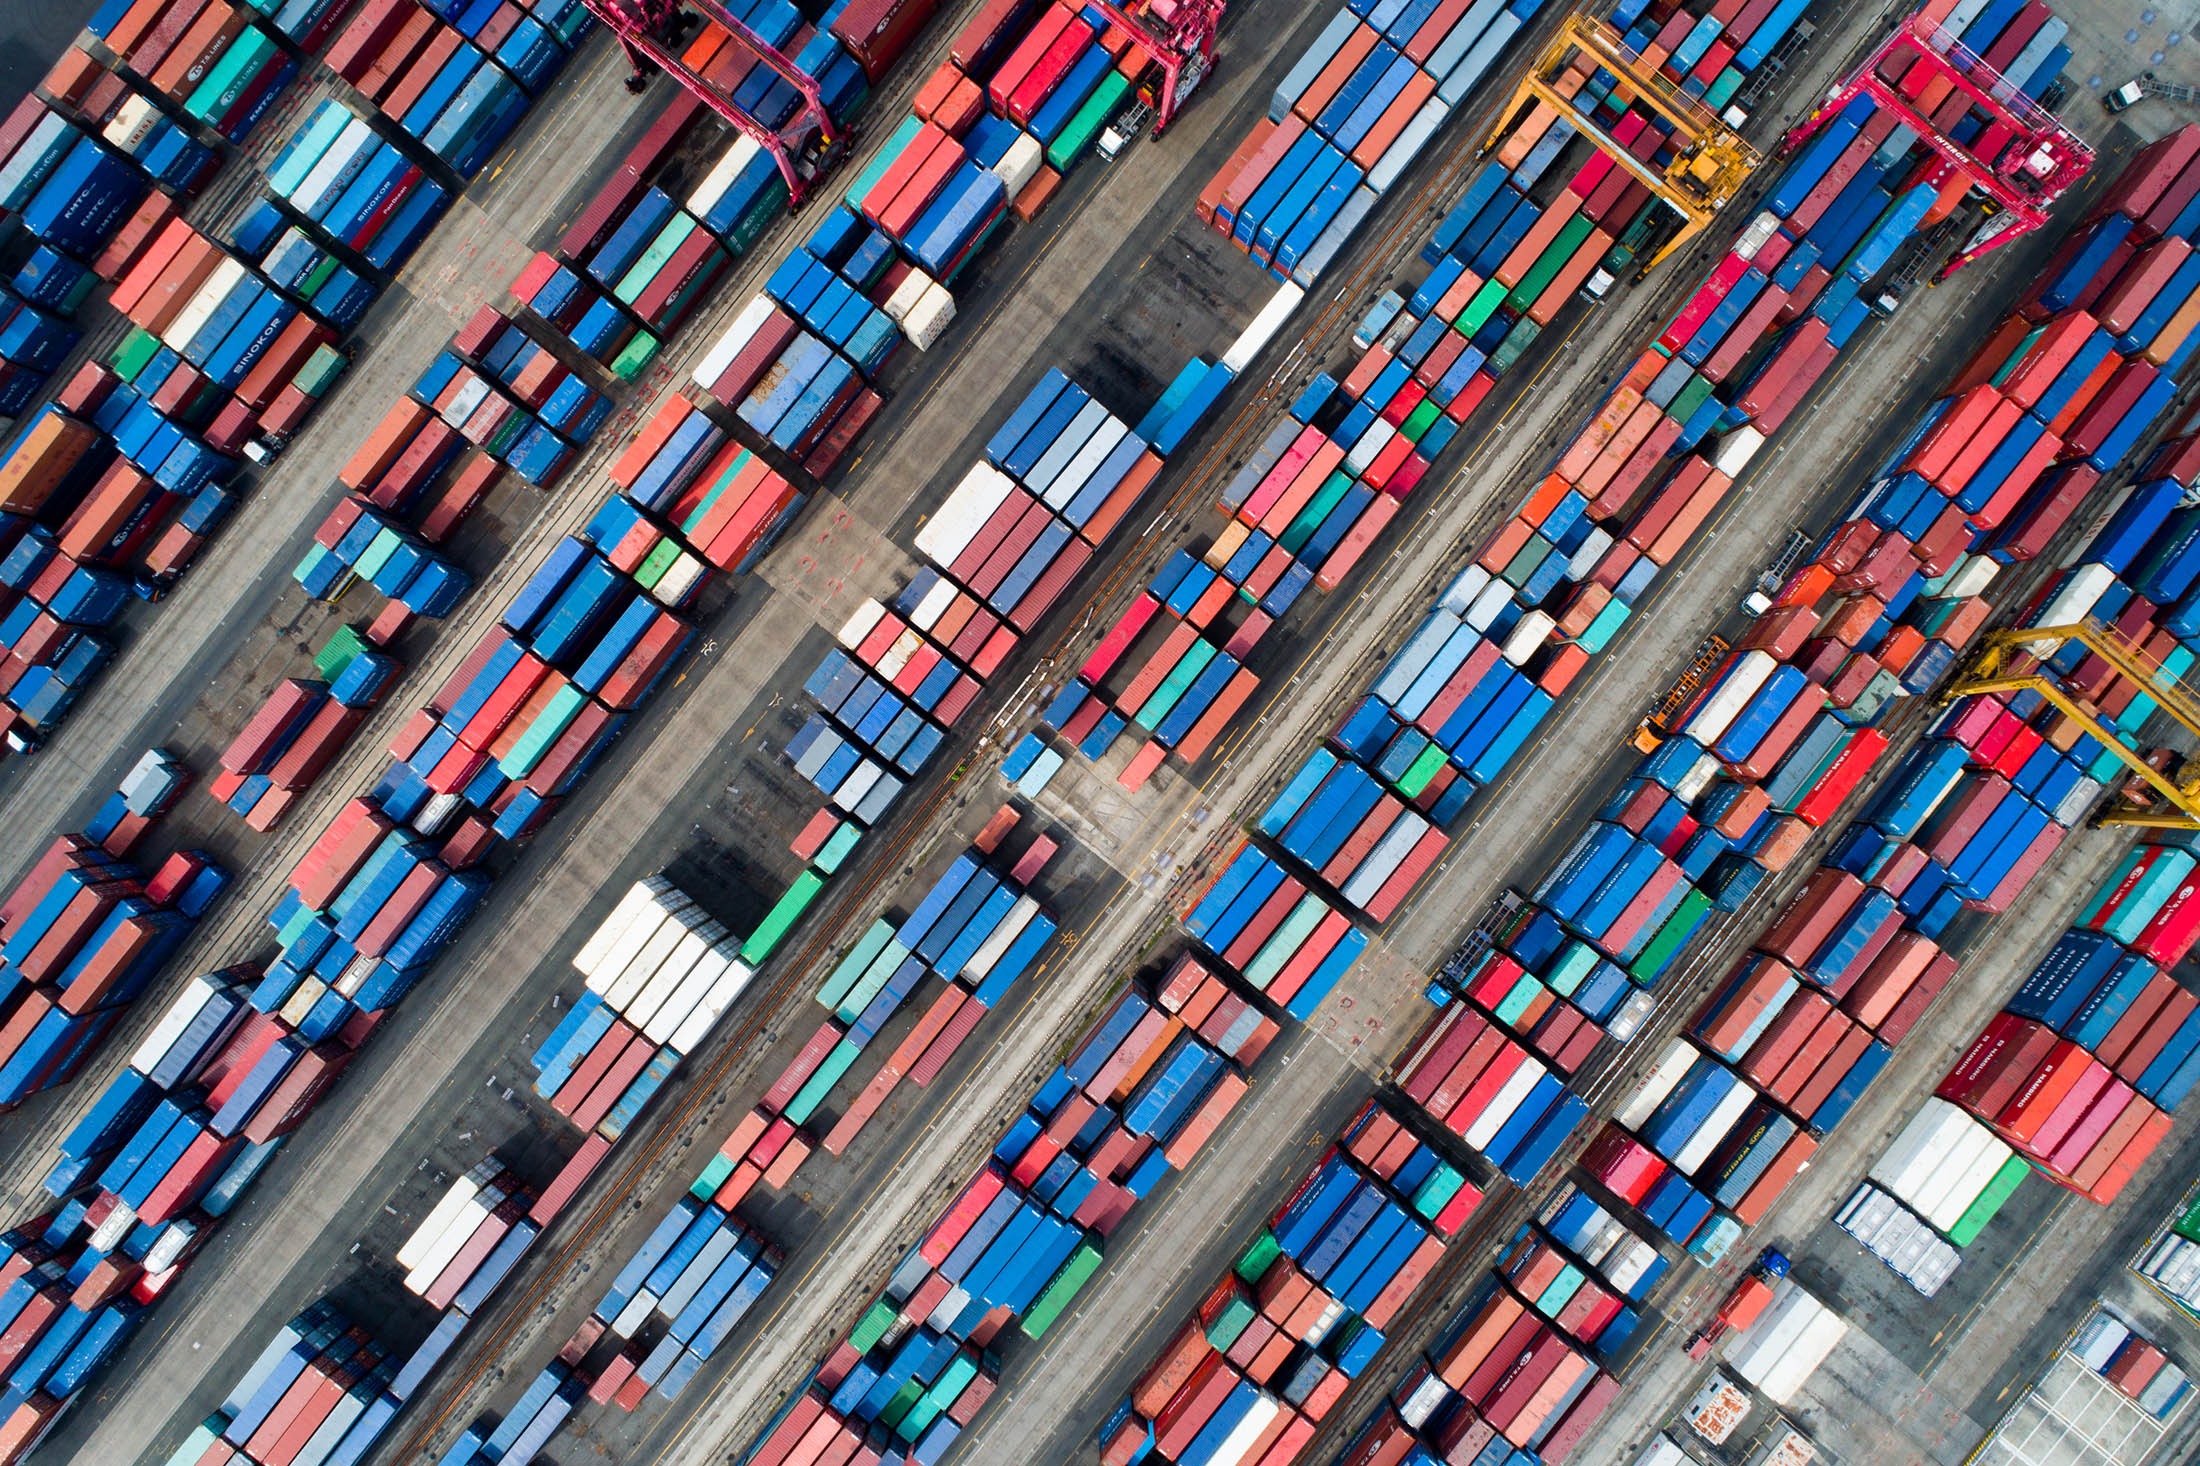 Shipping containers sit stacked in this aerial photograph taken above the Busan Port Terminal (BPT) in Busan, South Korea, on Monday, July 17, 2017. South Korea's exports will continue to rise in July and the third quarter as global trade continues to recover and unit costs rise, especially in sectors including semiconductors, vessels, petroleum goods and steel, according to a statement from the trade ministry.
